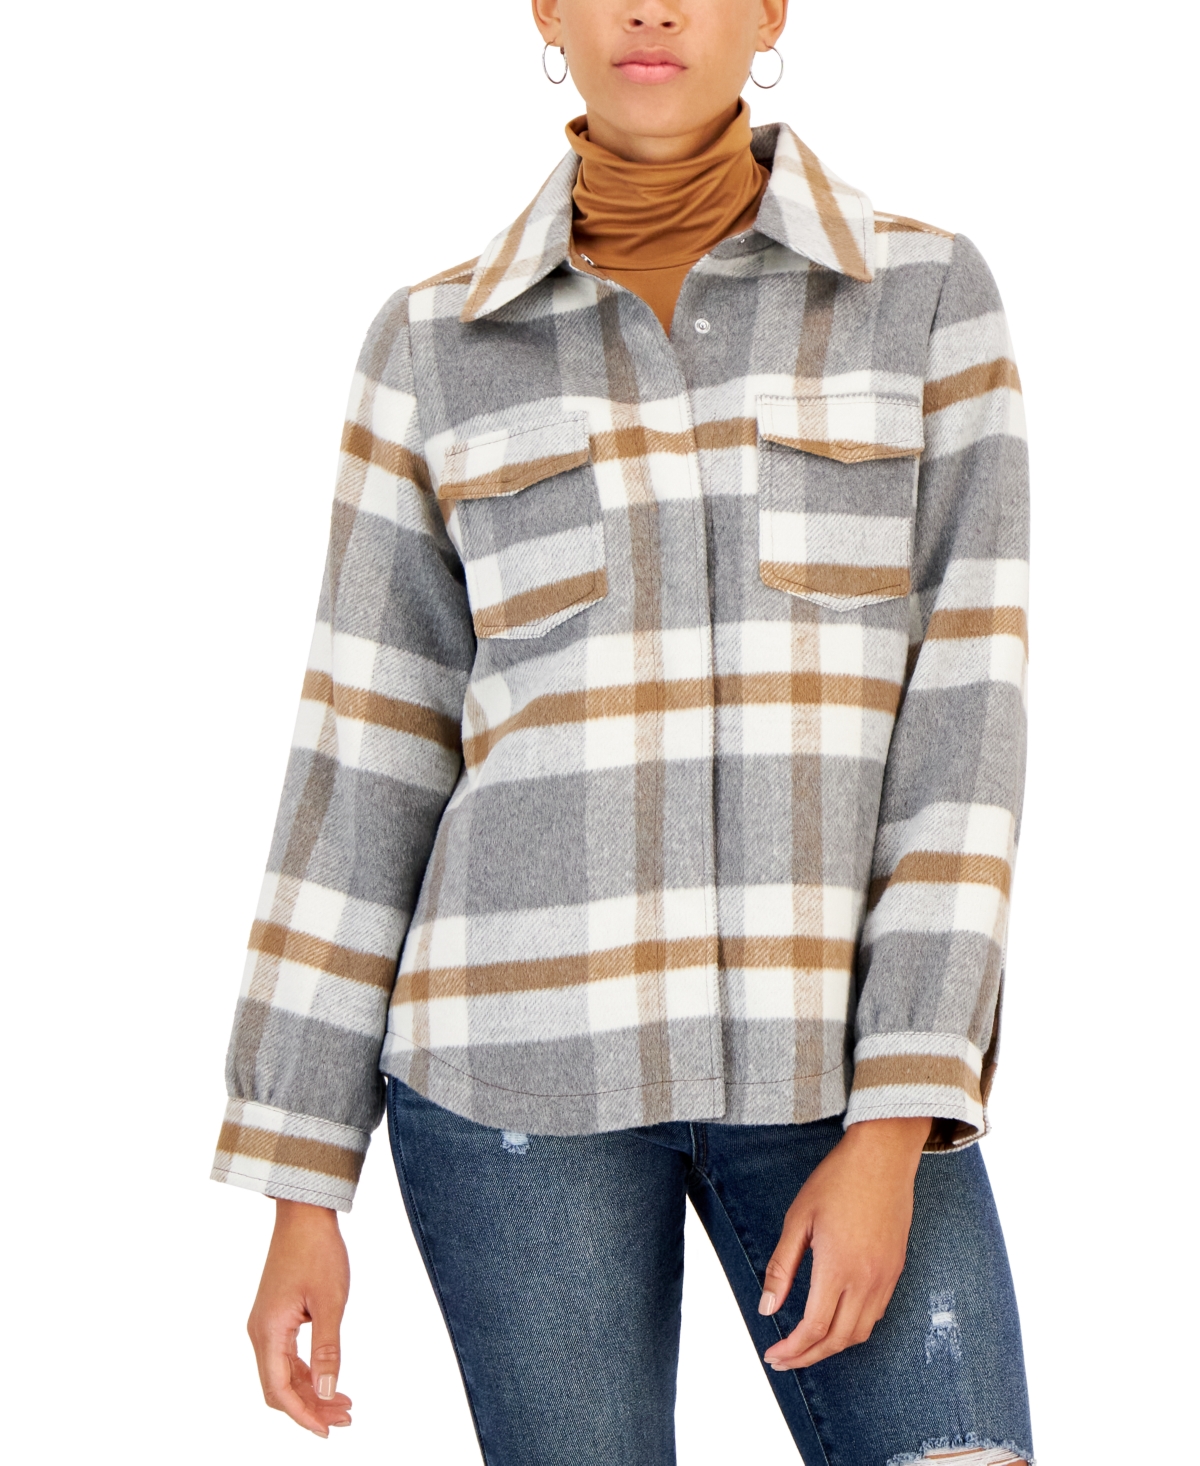 Maralyn & Me Juniors' Plaid Button-Front Shirt Jacket, Created for Macy's